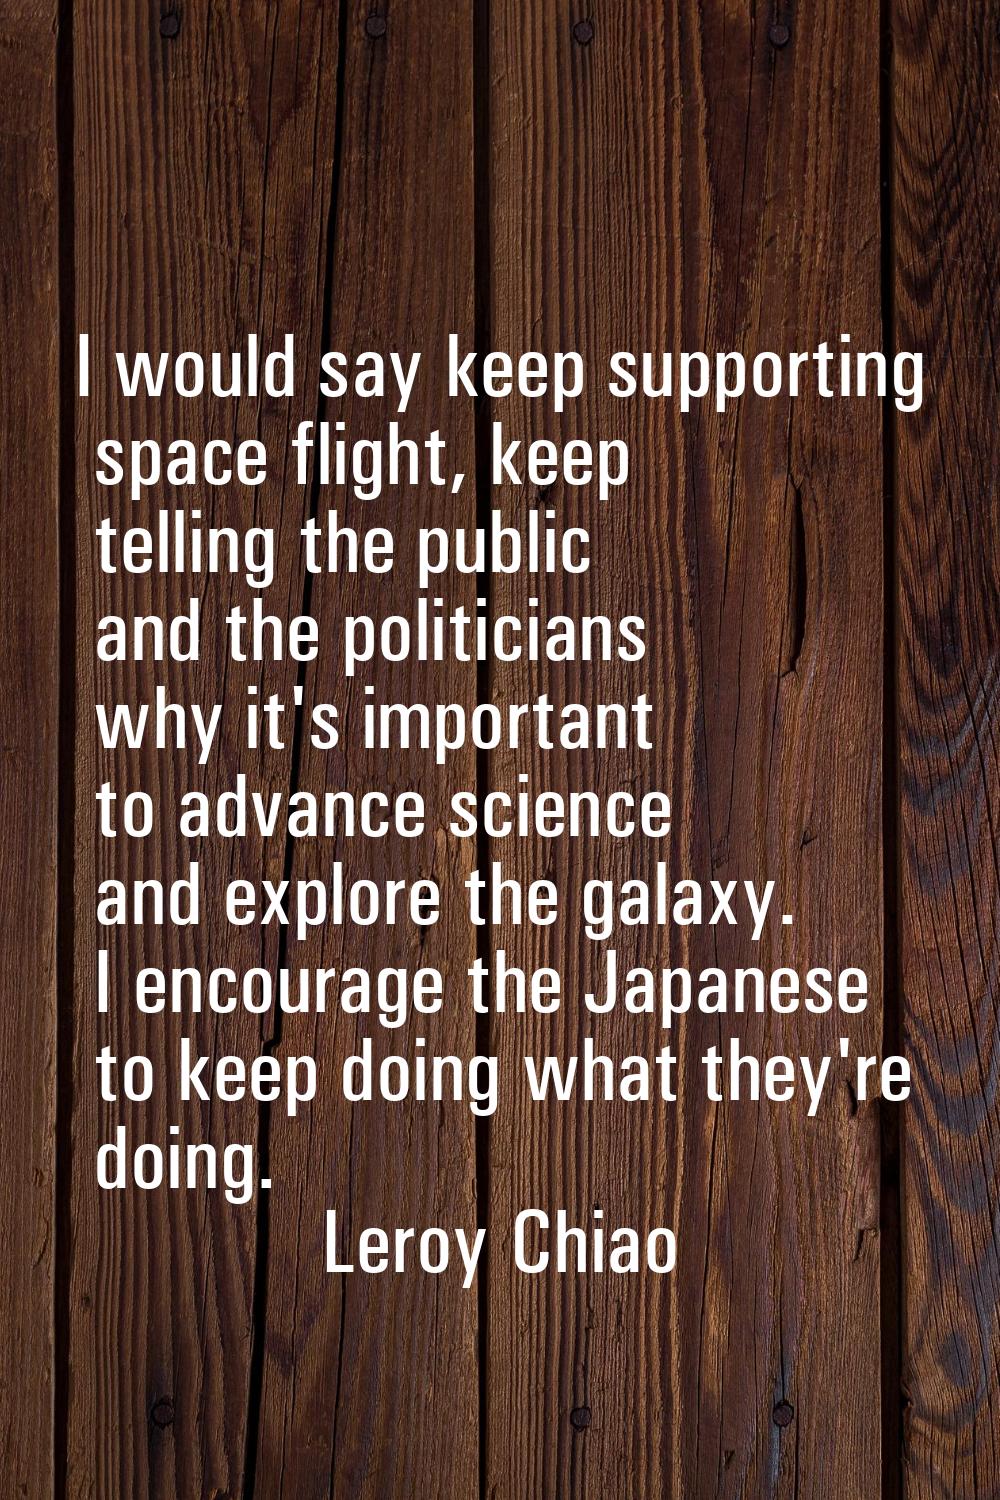 I would say keep supporting space flight, keep telling the public and the politicians why it's impo